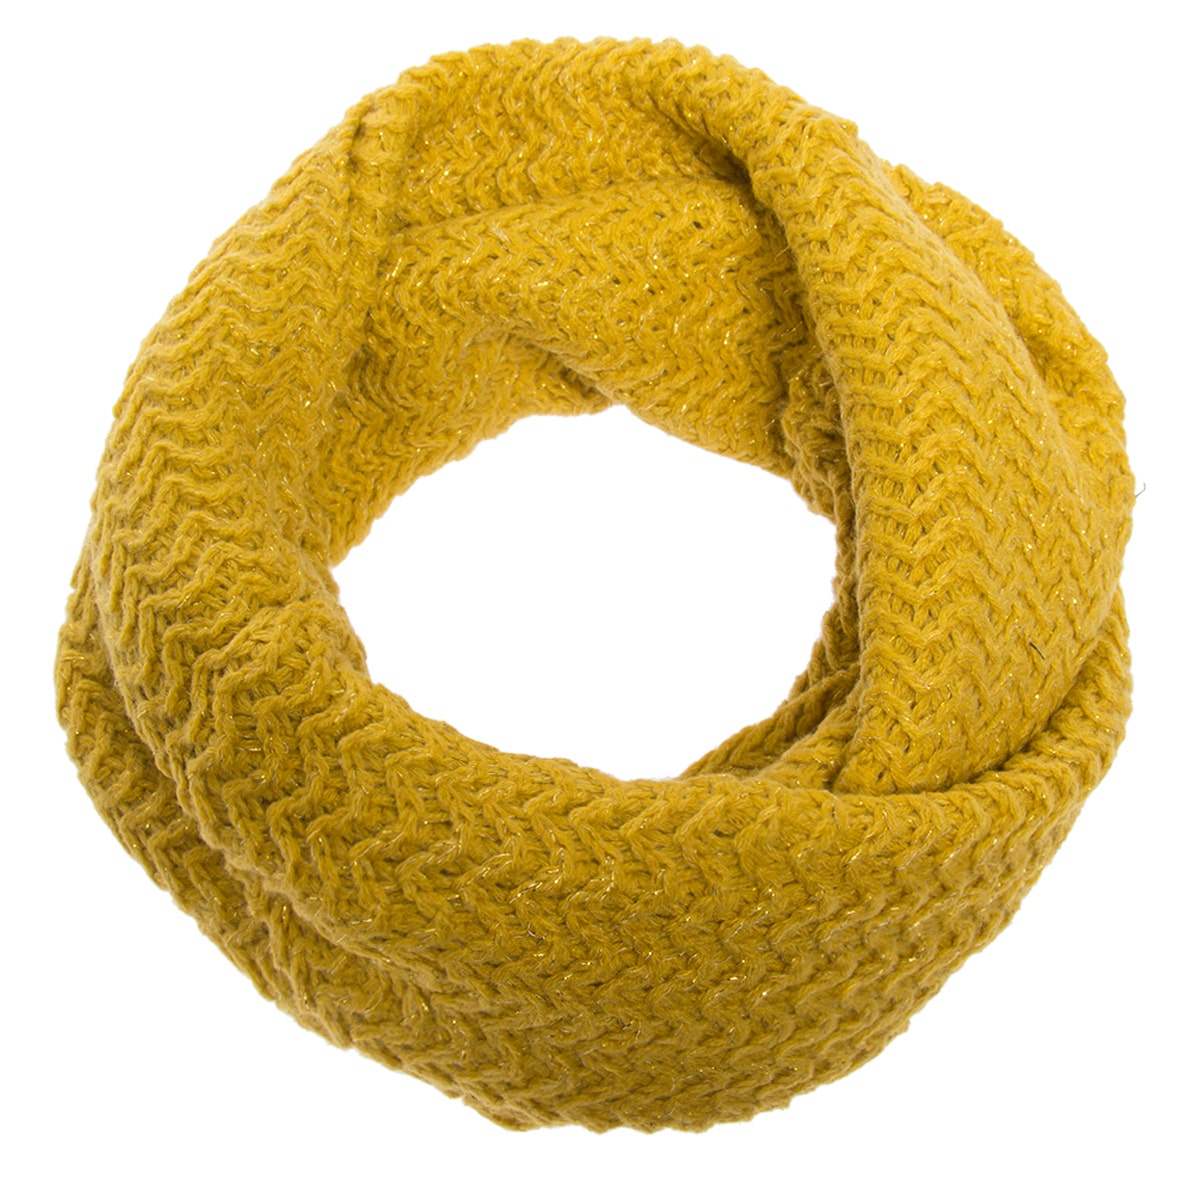 Knit Infinity by Scarf Loop The Standard With Metallic Royal